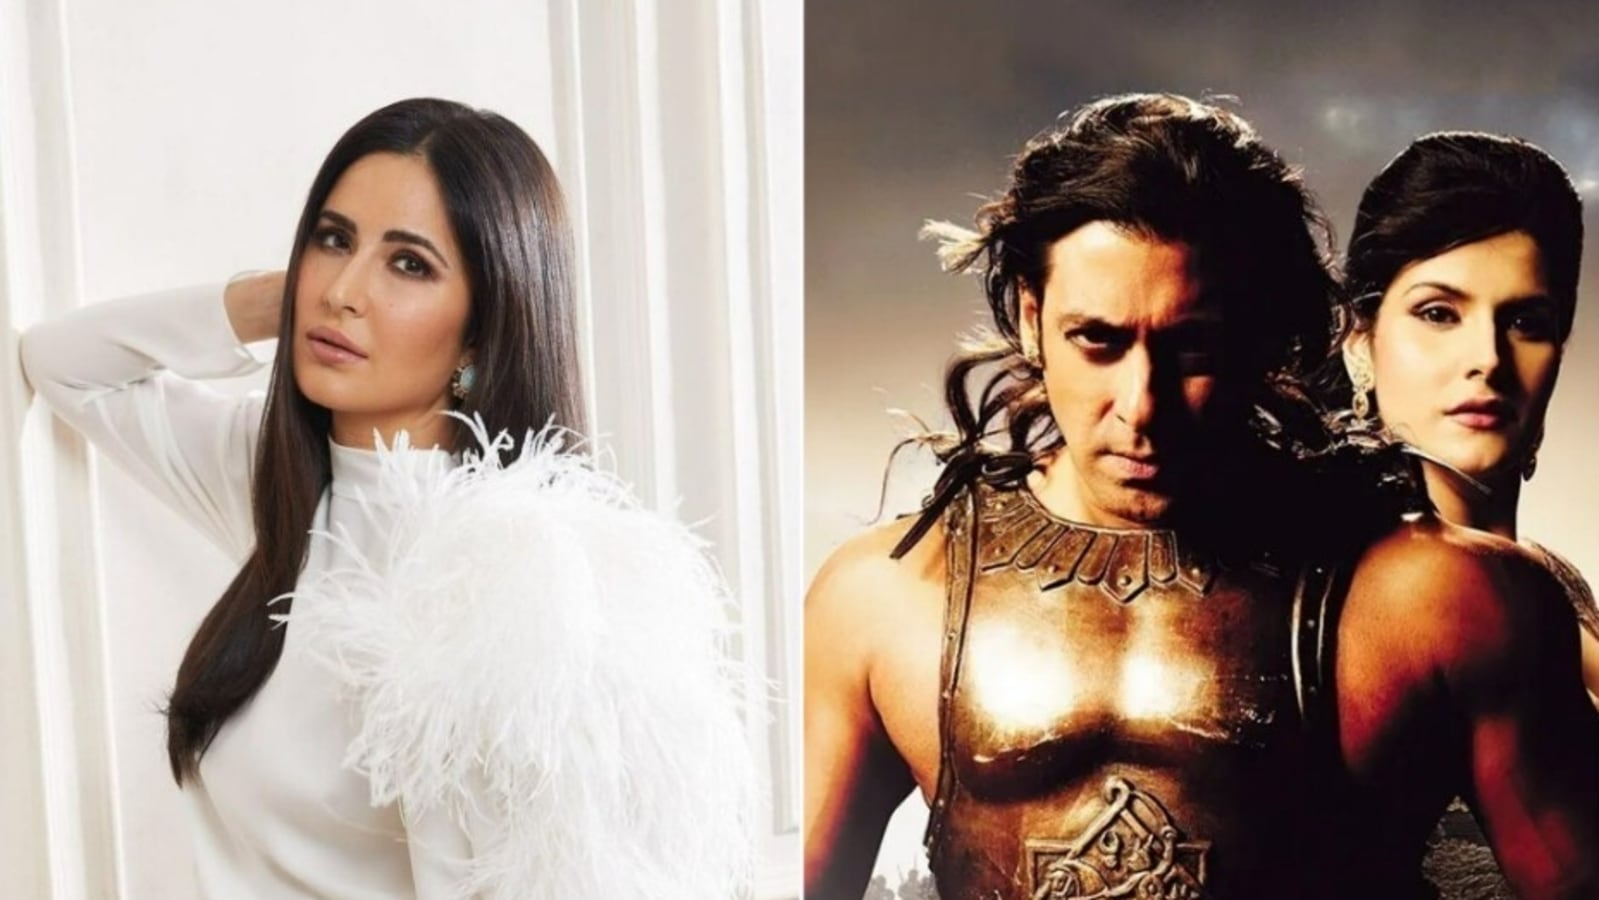 When Katrina Kaif spoke about Salman working with girls who look like her Bollywood pic